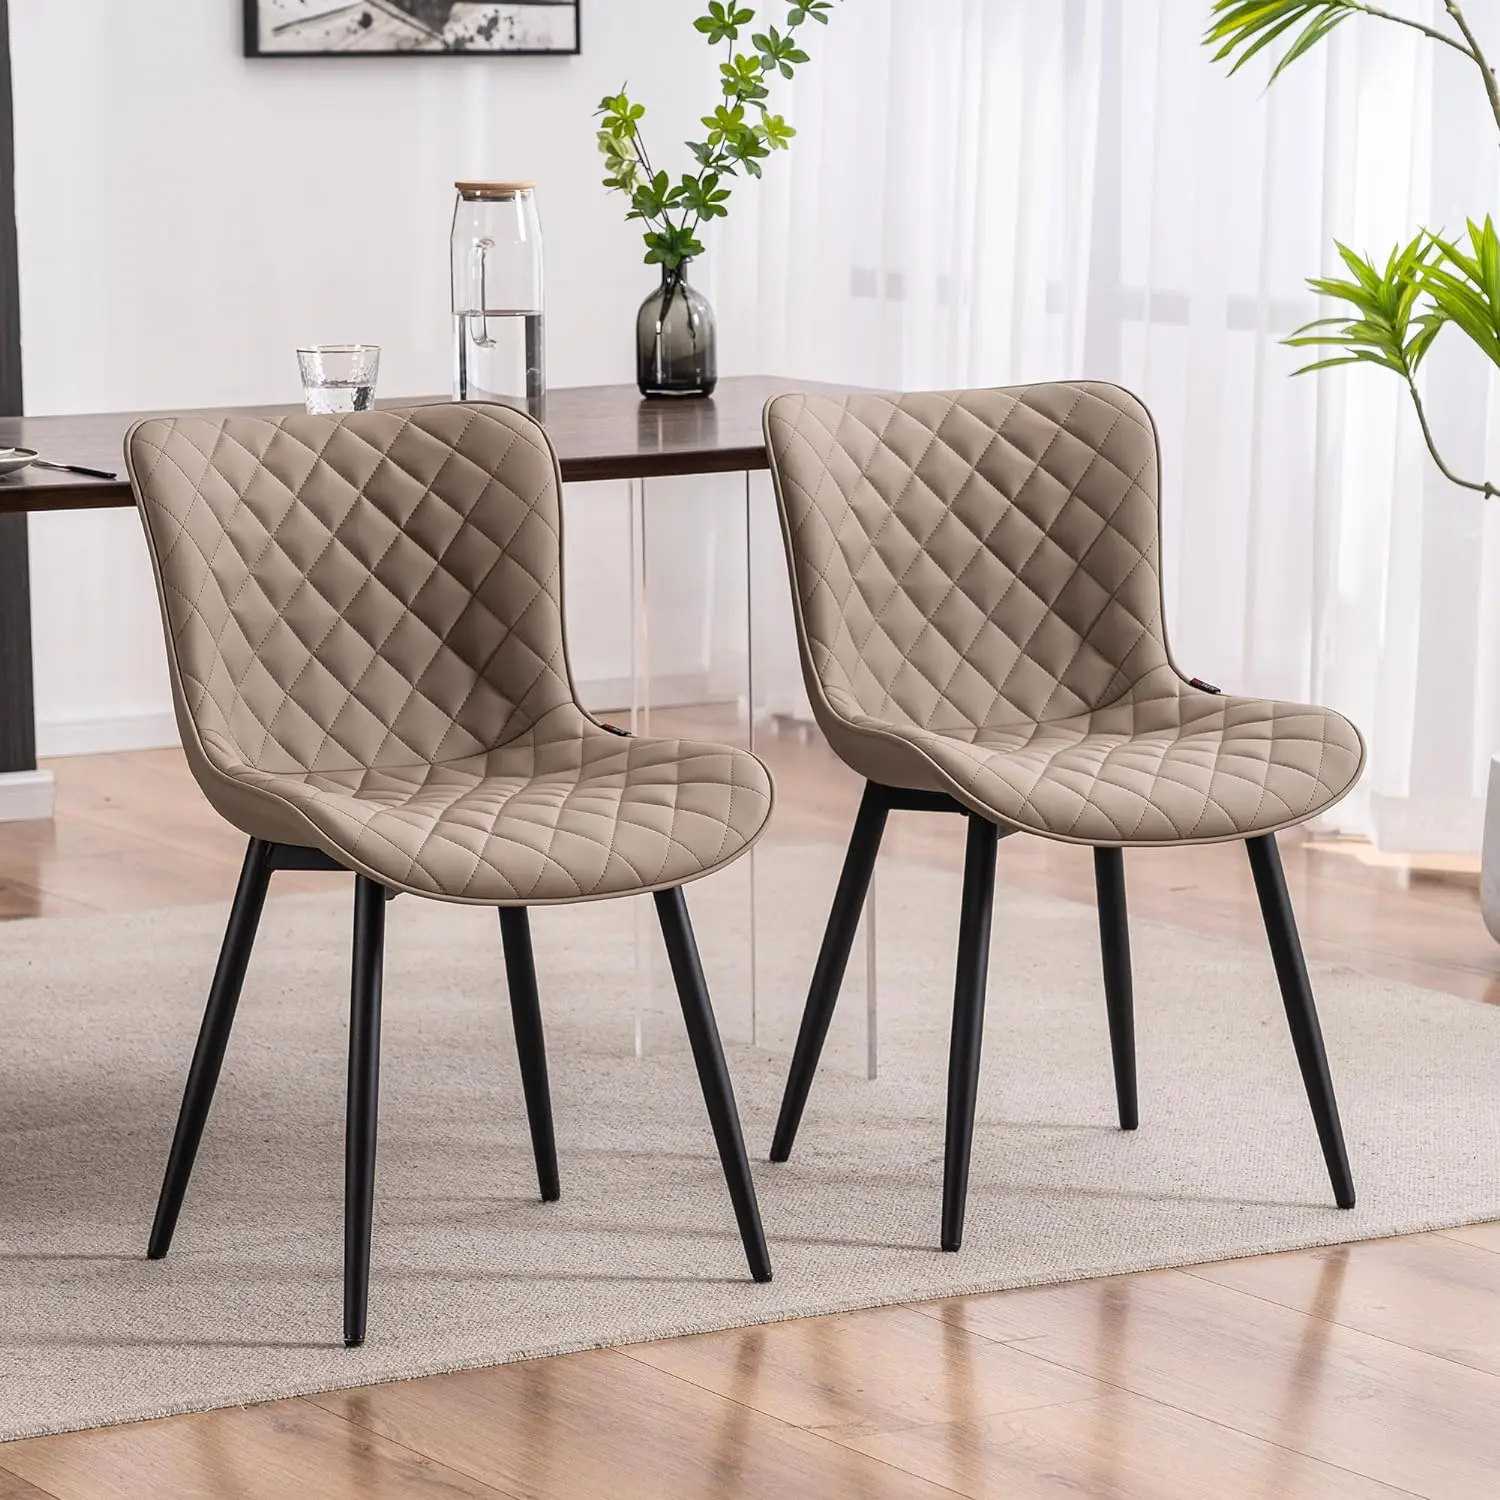 

Khaki Dining Chairs Set of 2 Mid Century Modern PU Leather Diamond Upholstered Accent Guest Dinner Chair